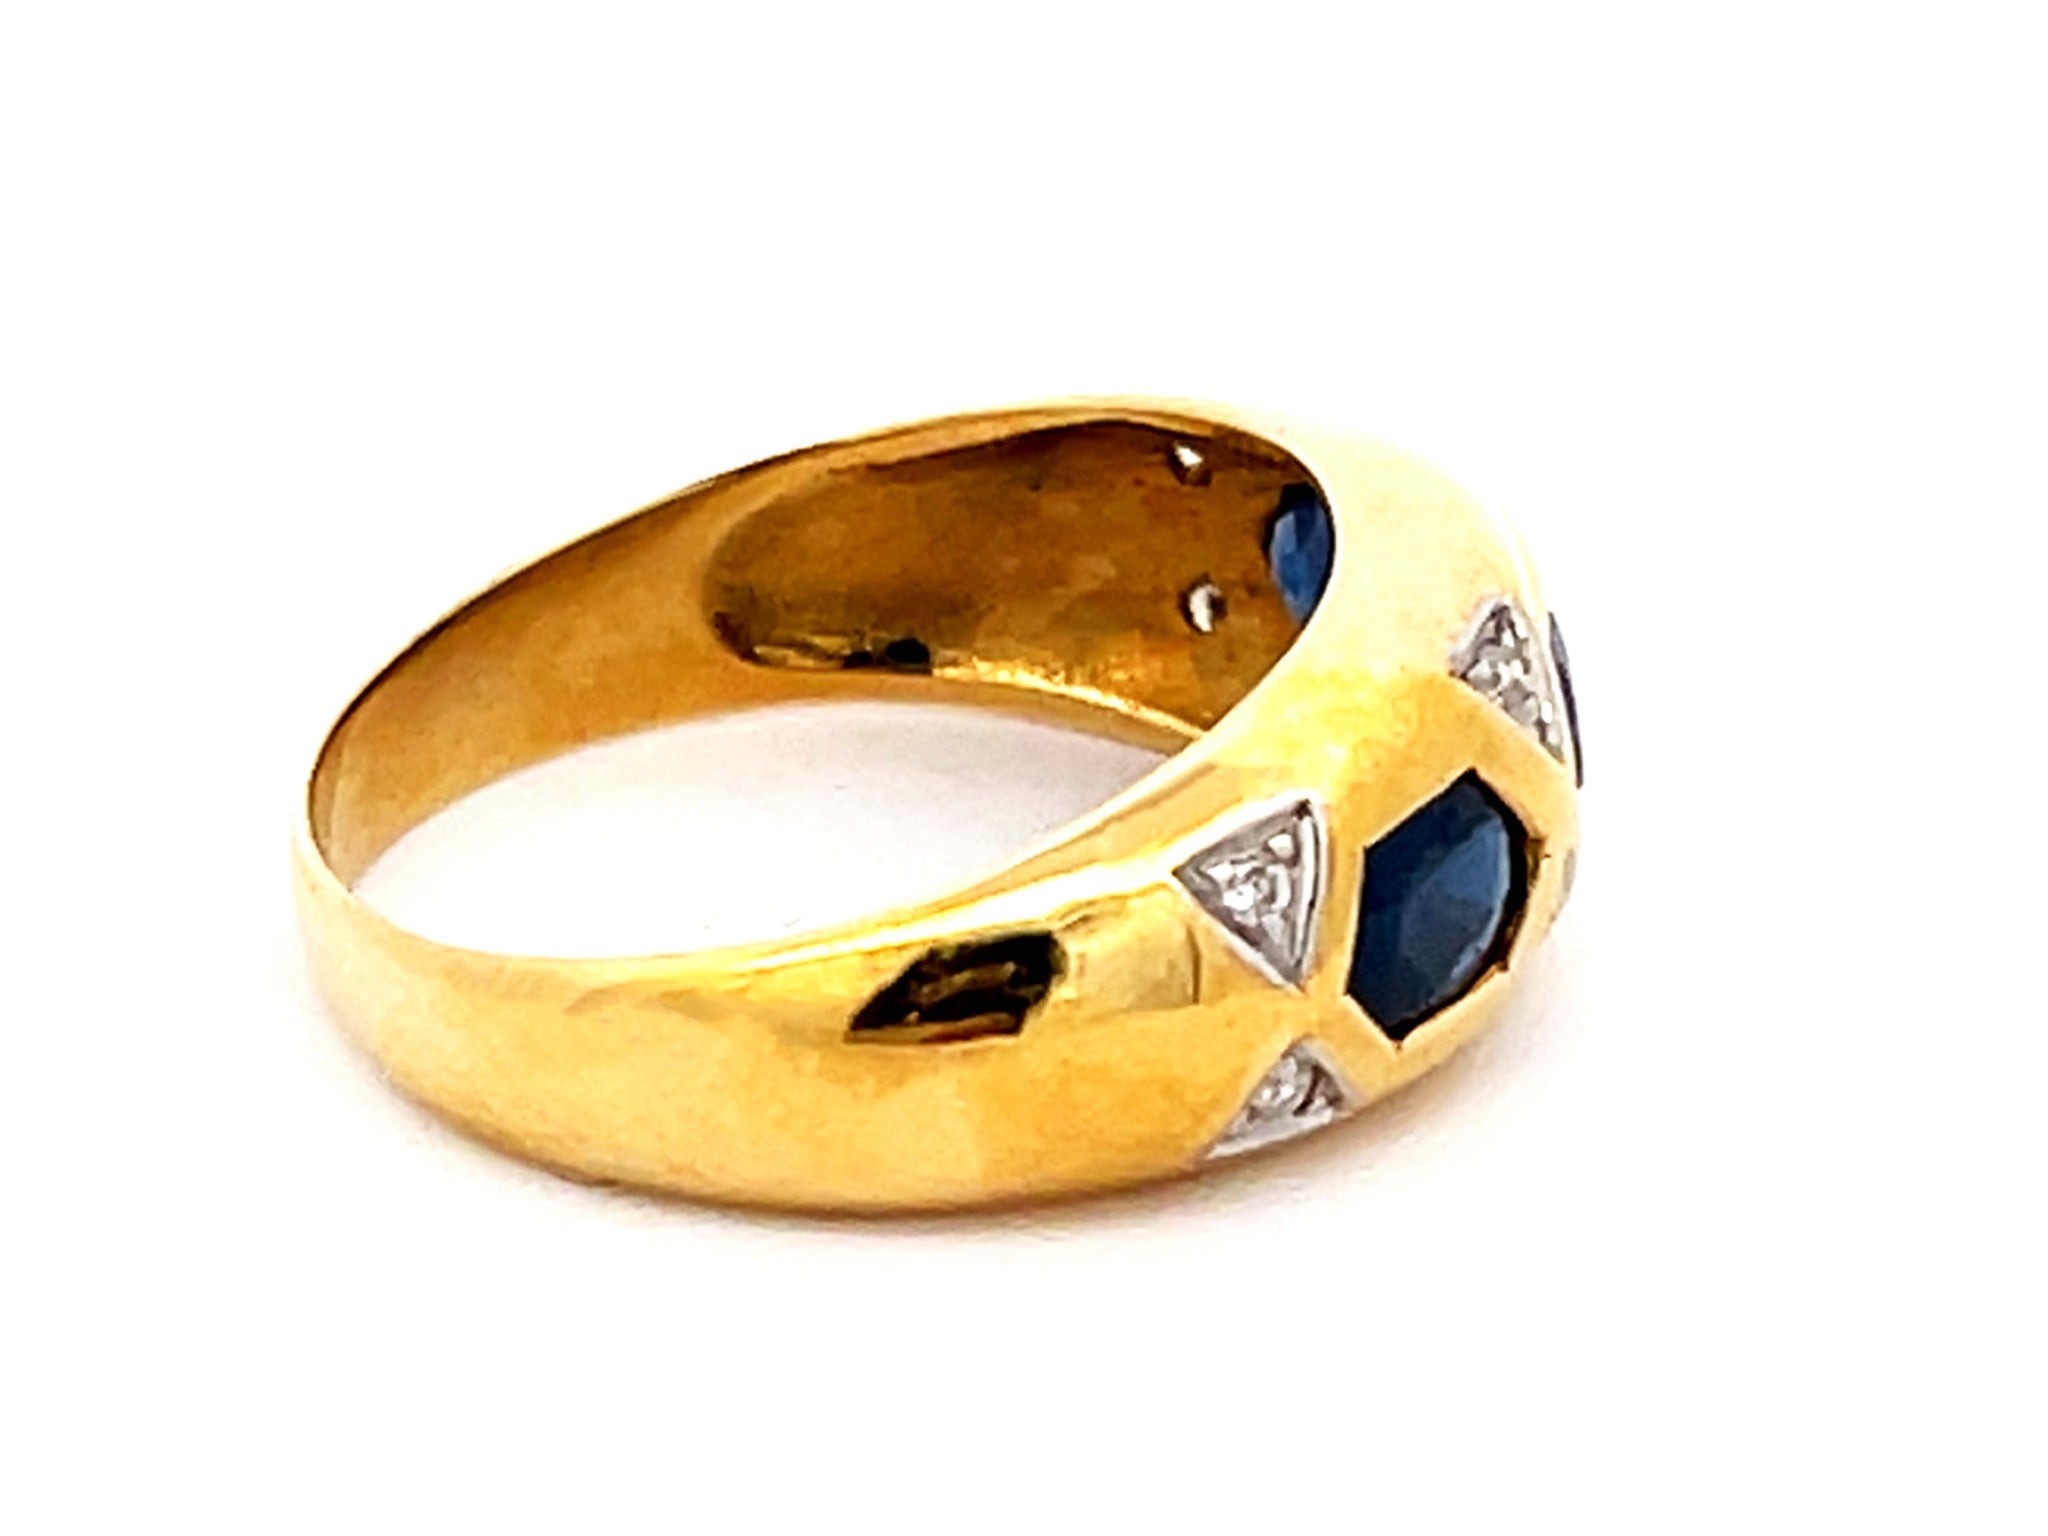 Vintage Blue Sapphire and Diamond Band Ring in 18k Yellow Gold